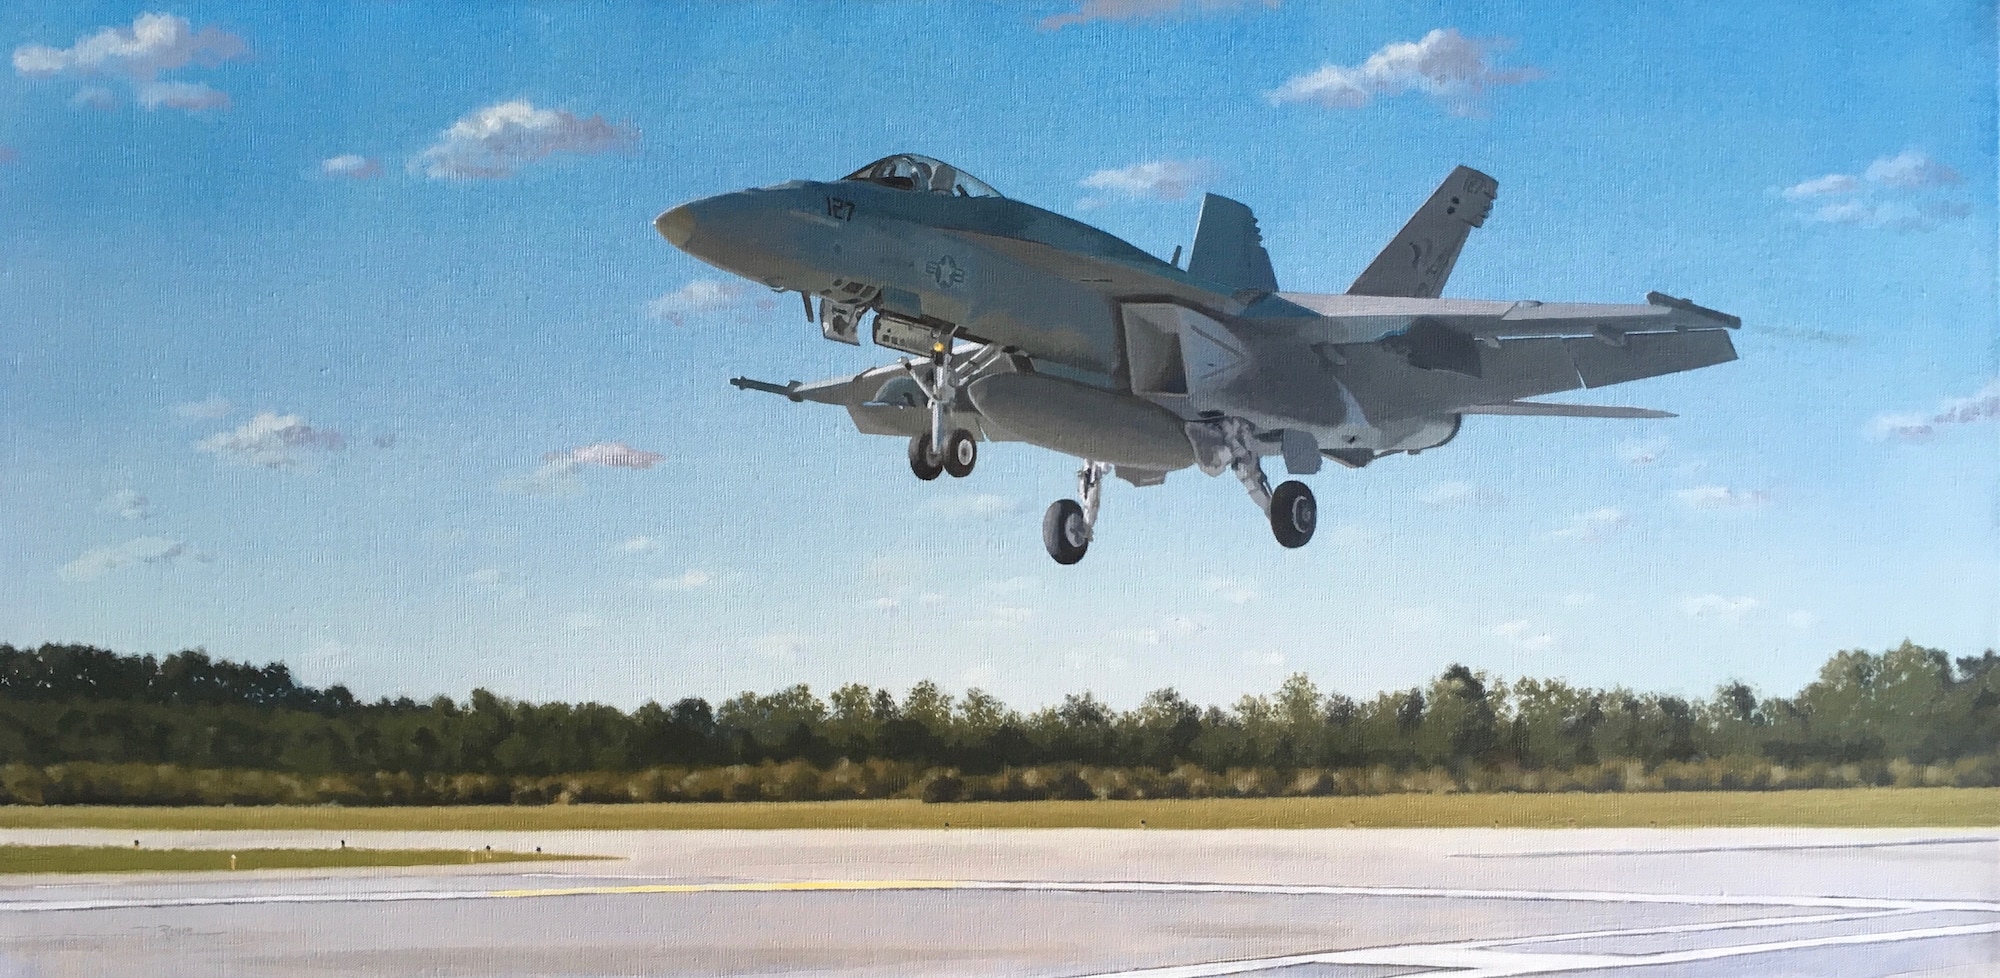 The American Society of Aviation Artists (ASAA) will have their 33rd Annual International Aerospace Art Exhibition on display at the National Museum of the U.S. Air Force May 10, 2019 — Oct. 31, 2019. In addition the exhibit will include retrospective artwork from ASAA artists, such as this painting by Doug Rowe.